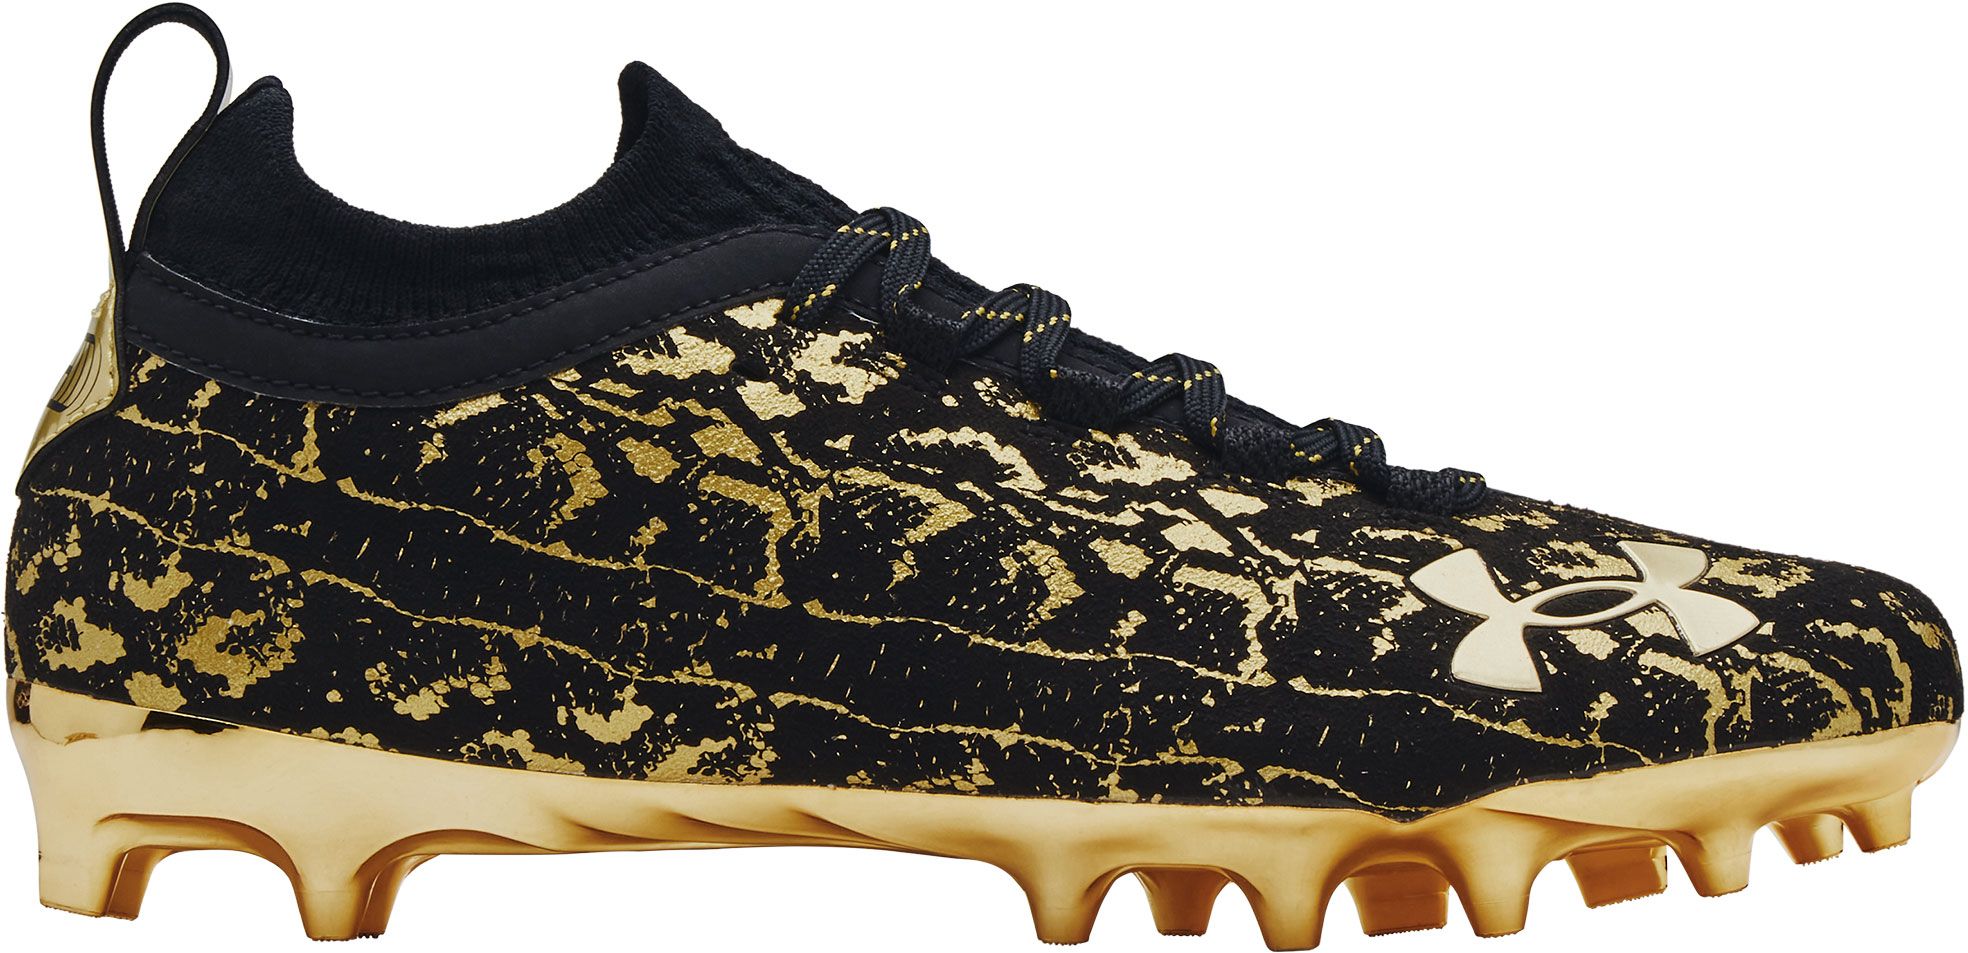 Spotlight Lux Suede 2.0 Football Cleats 